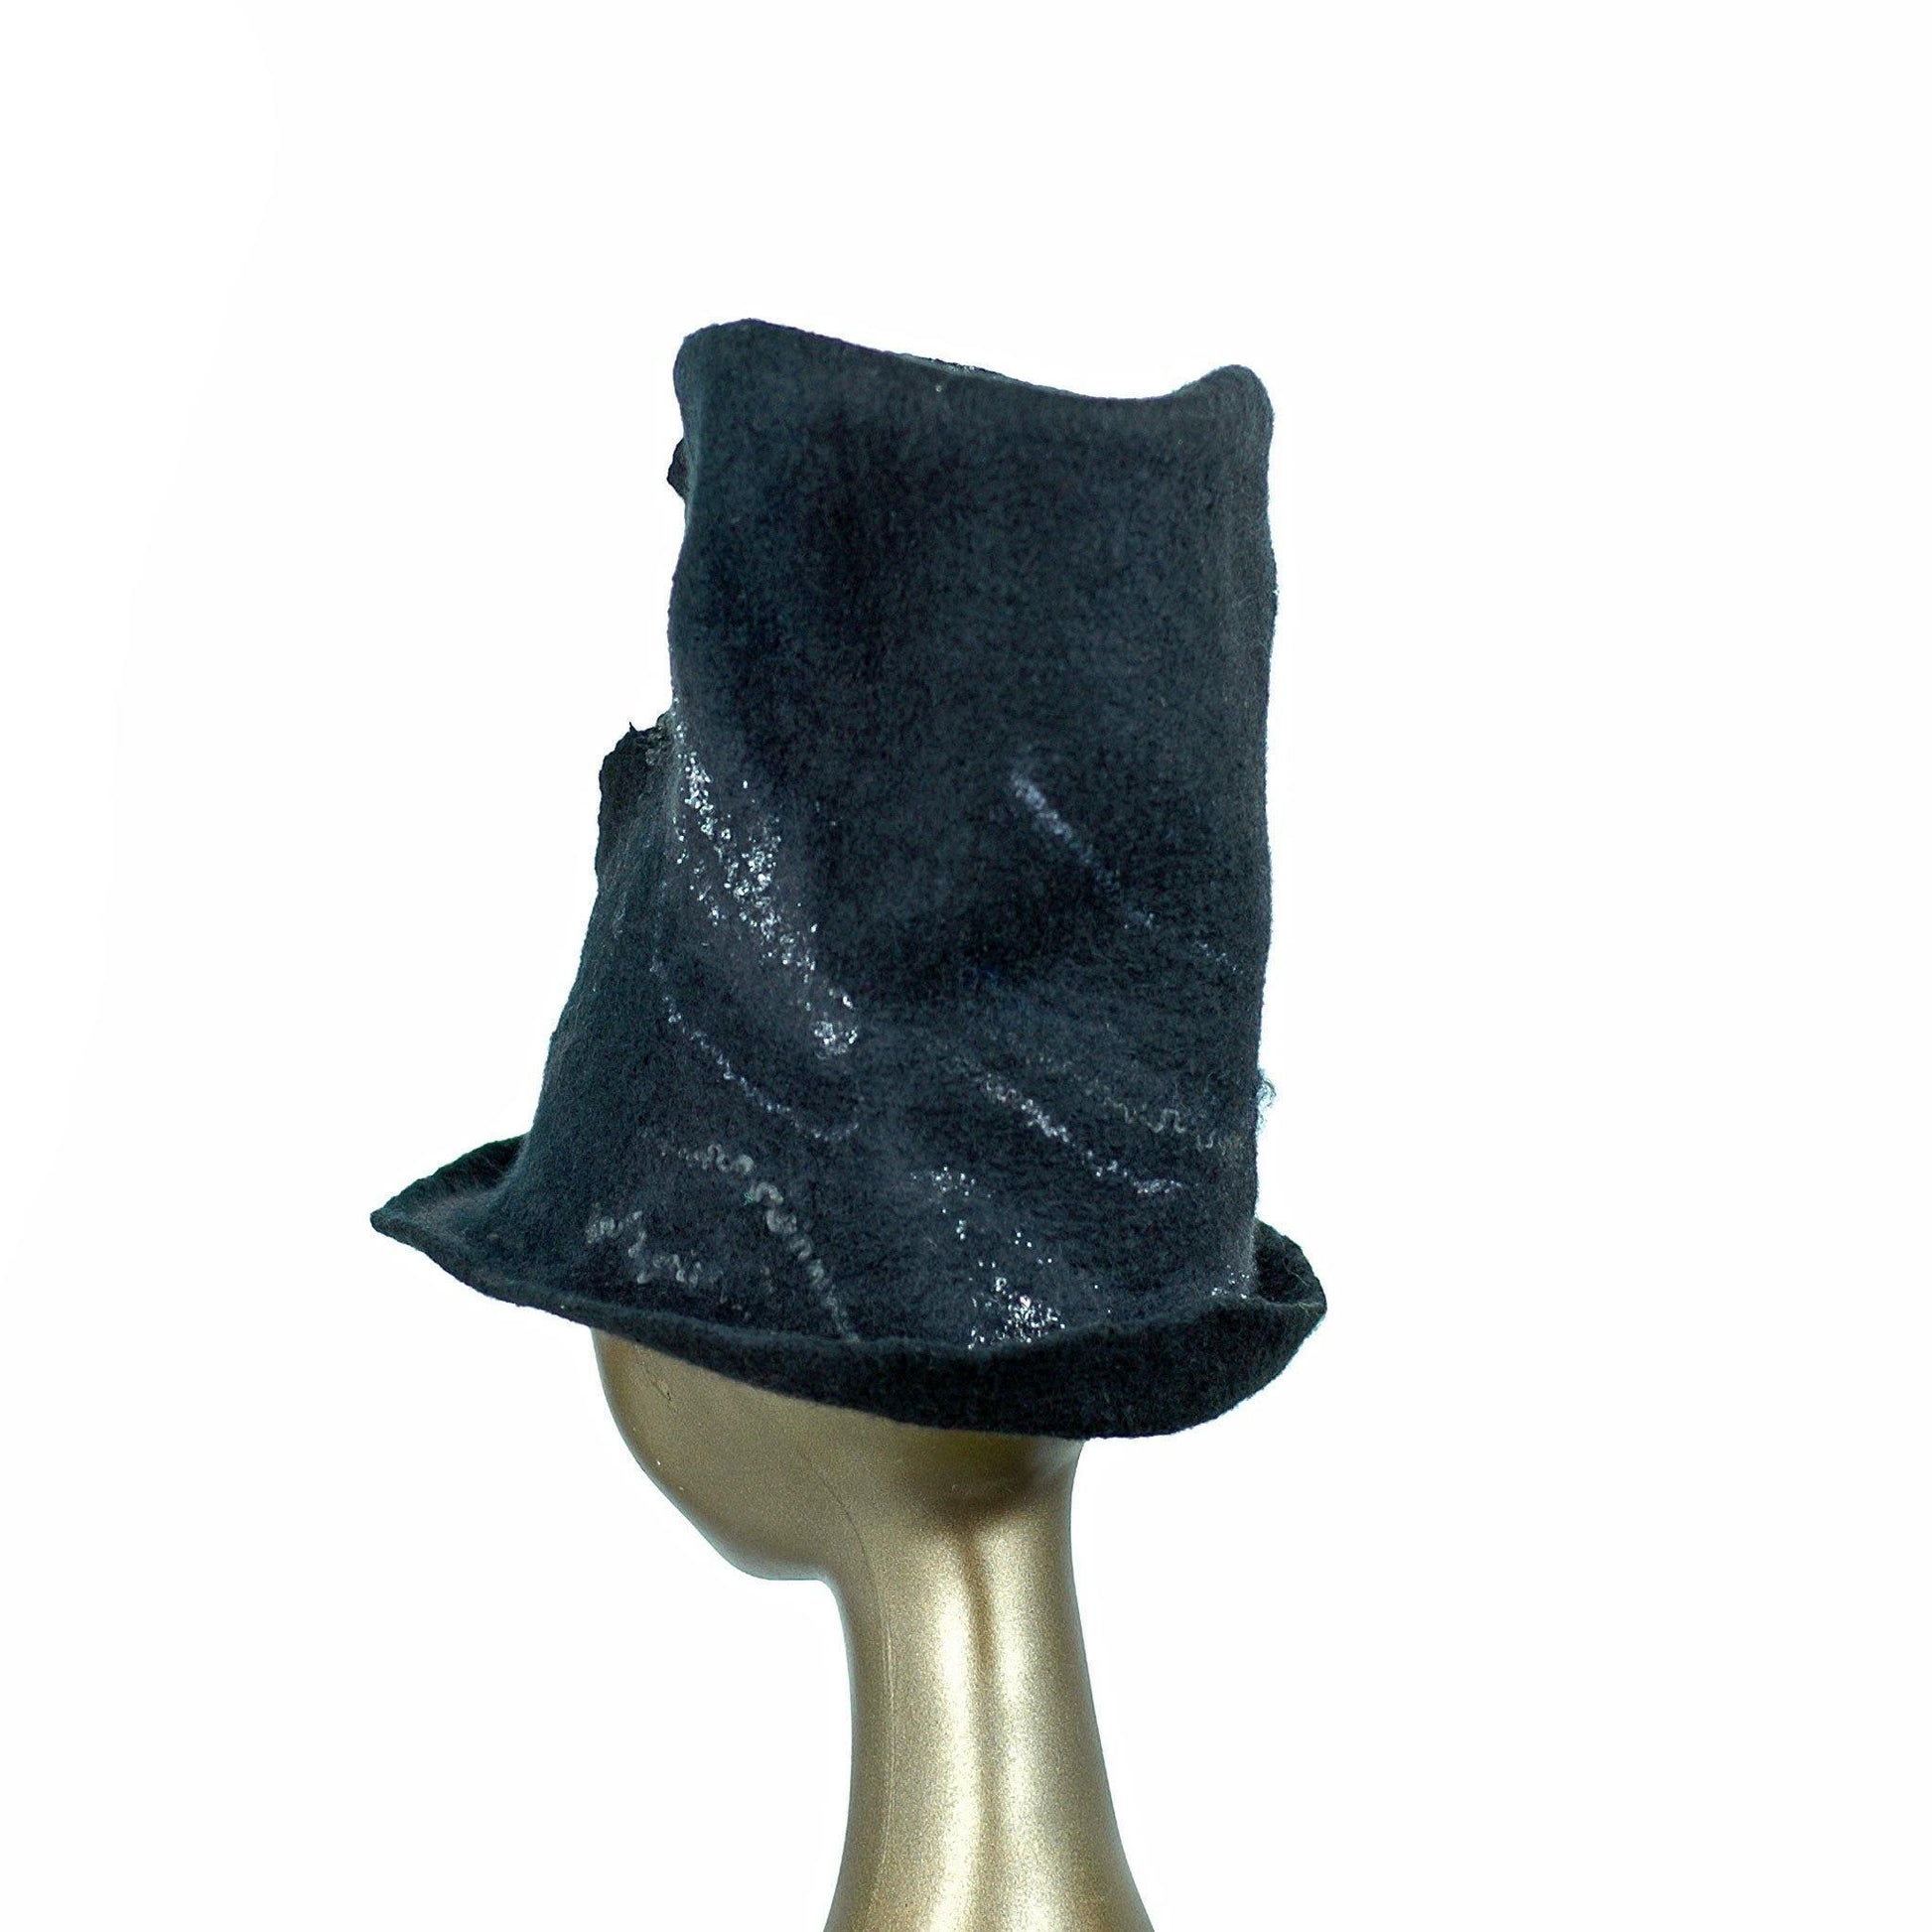 Tall Black Felted Top Hat with Velvet Decorations - back view